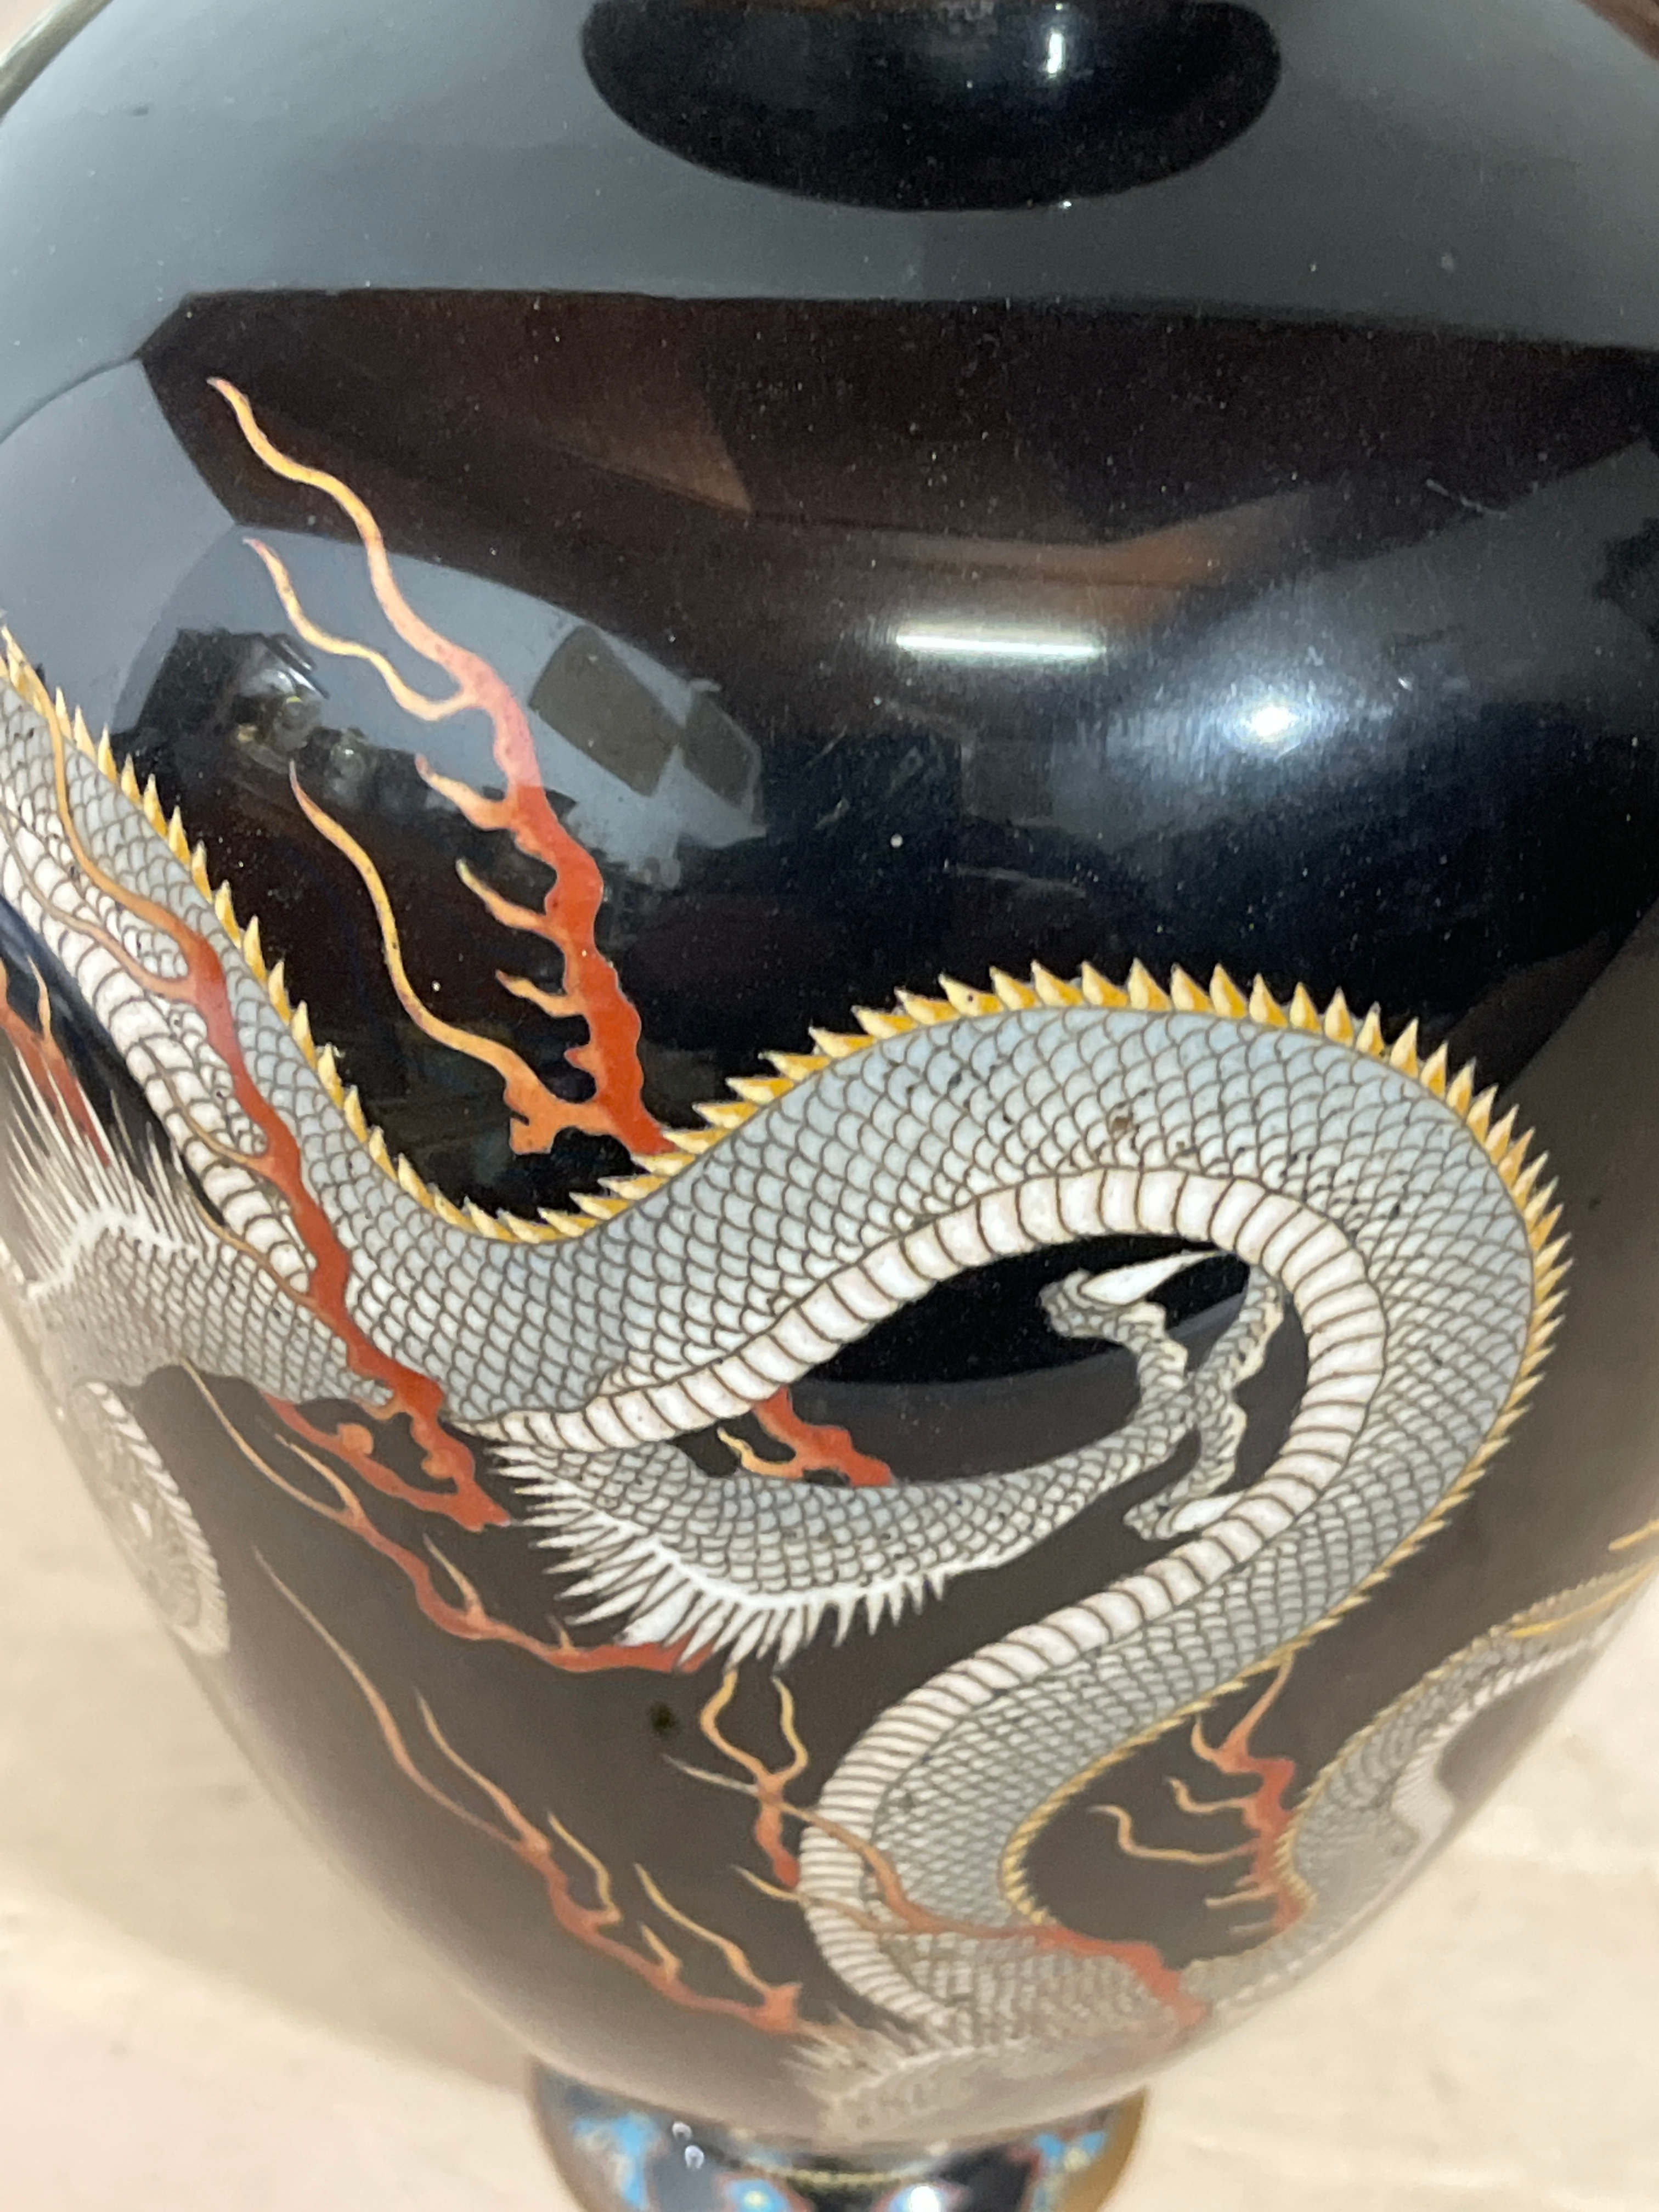 Lot of Cloisonne Dragon Vase 240mm tall and 150mm wide. - Image 5 of 10